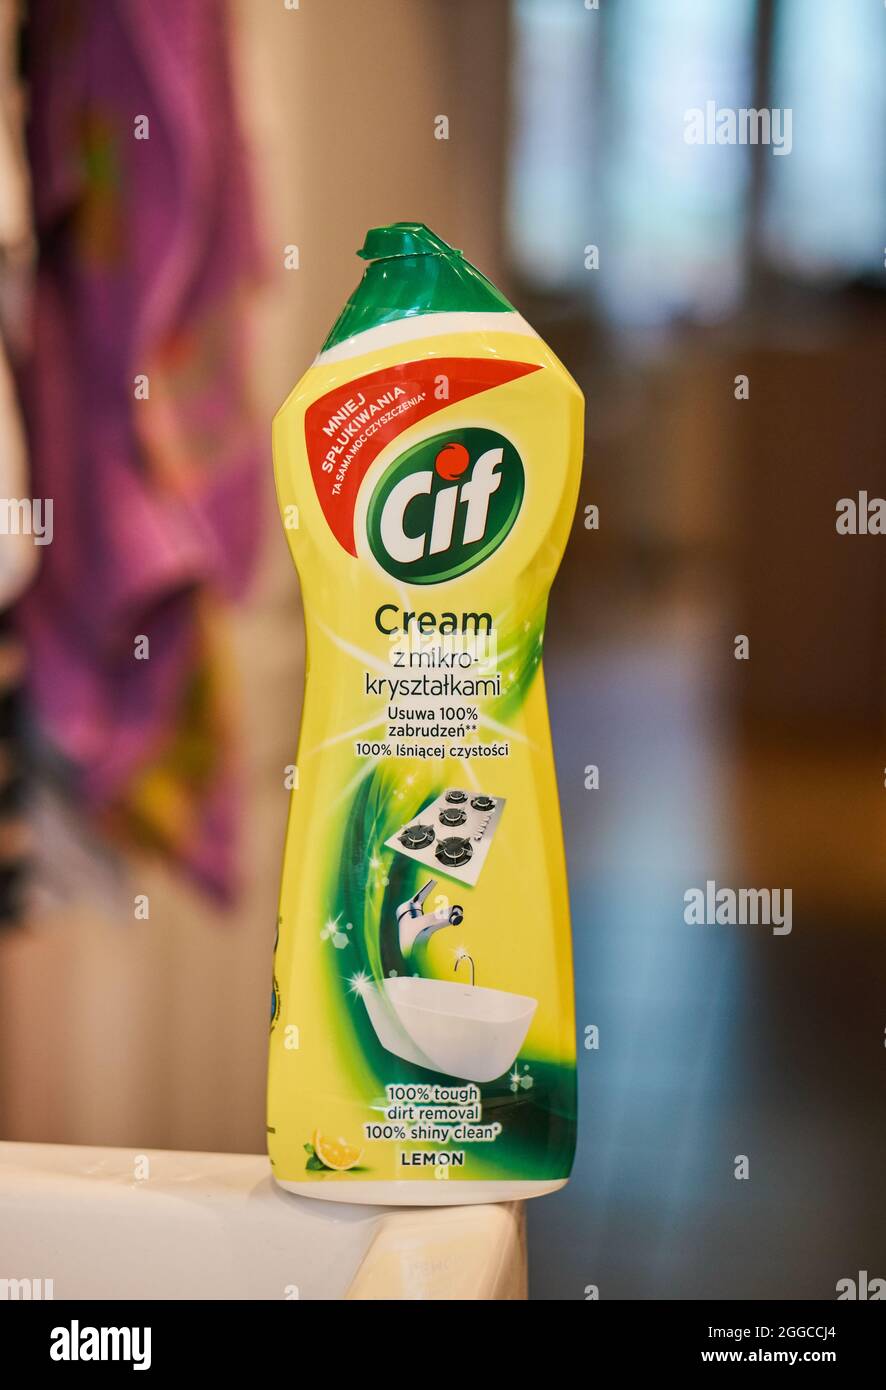 https://c8.alamy.com/comp/2GGCCJ4/poznan-poland-nov-25-2017-the-cif-cream-cleaning-product-for-kitchen-and-bathroom-in-a-plastic-bottle-2GGCCJ4.jpg